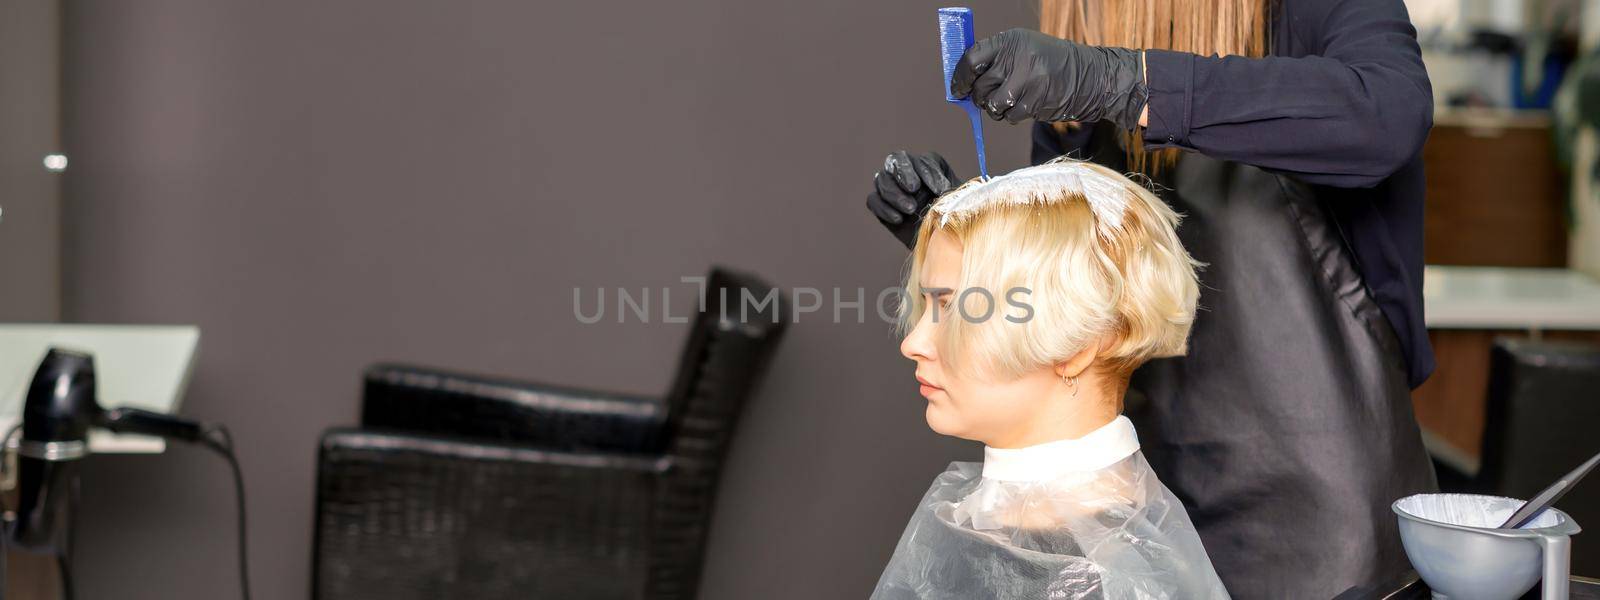 The professional hairdresser is dyeing the hair of her female client in a beauty salon